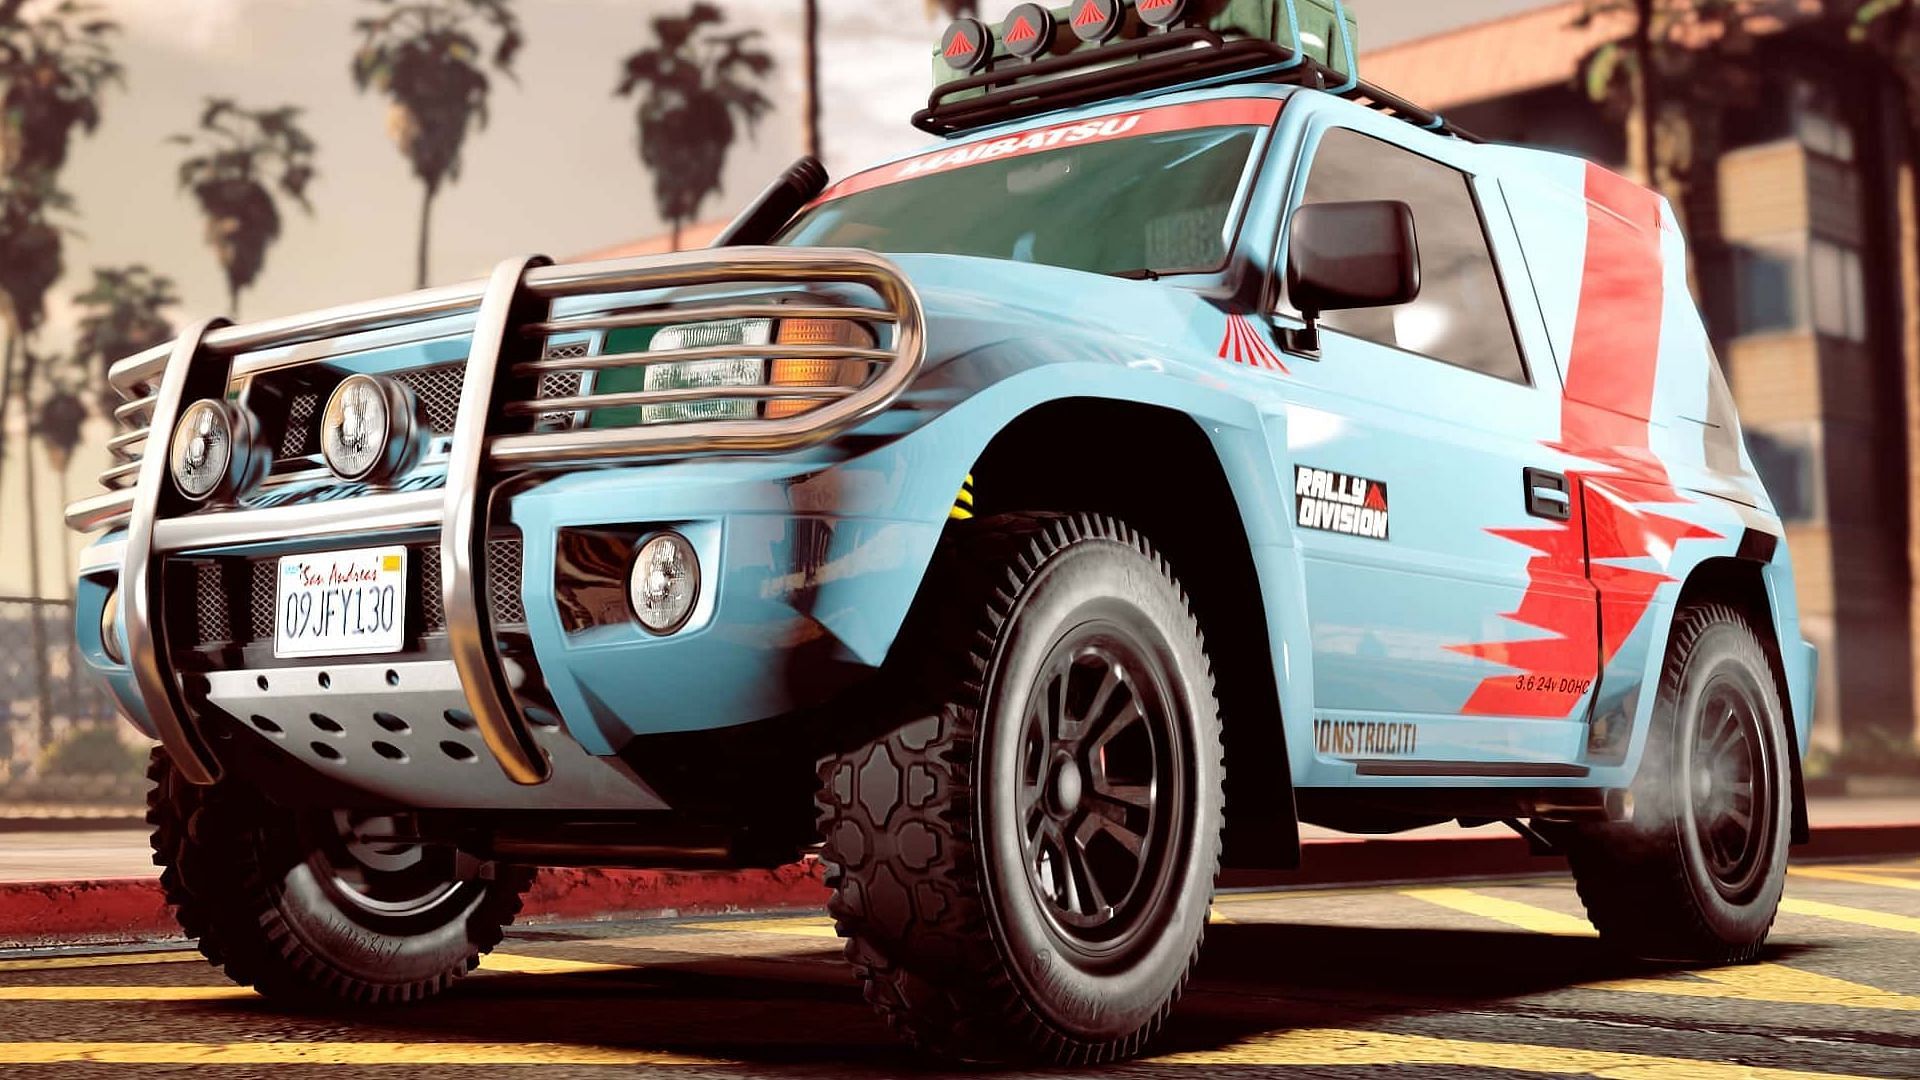 Another look at the new vehicle (Image via Rockstar Games)